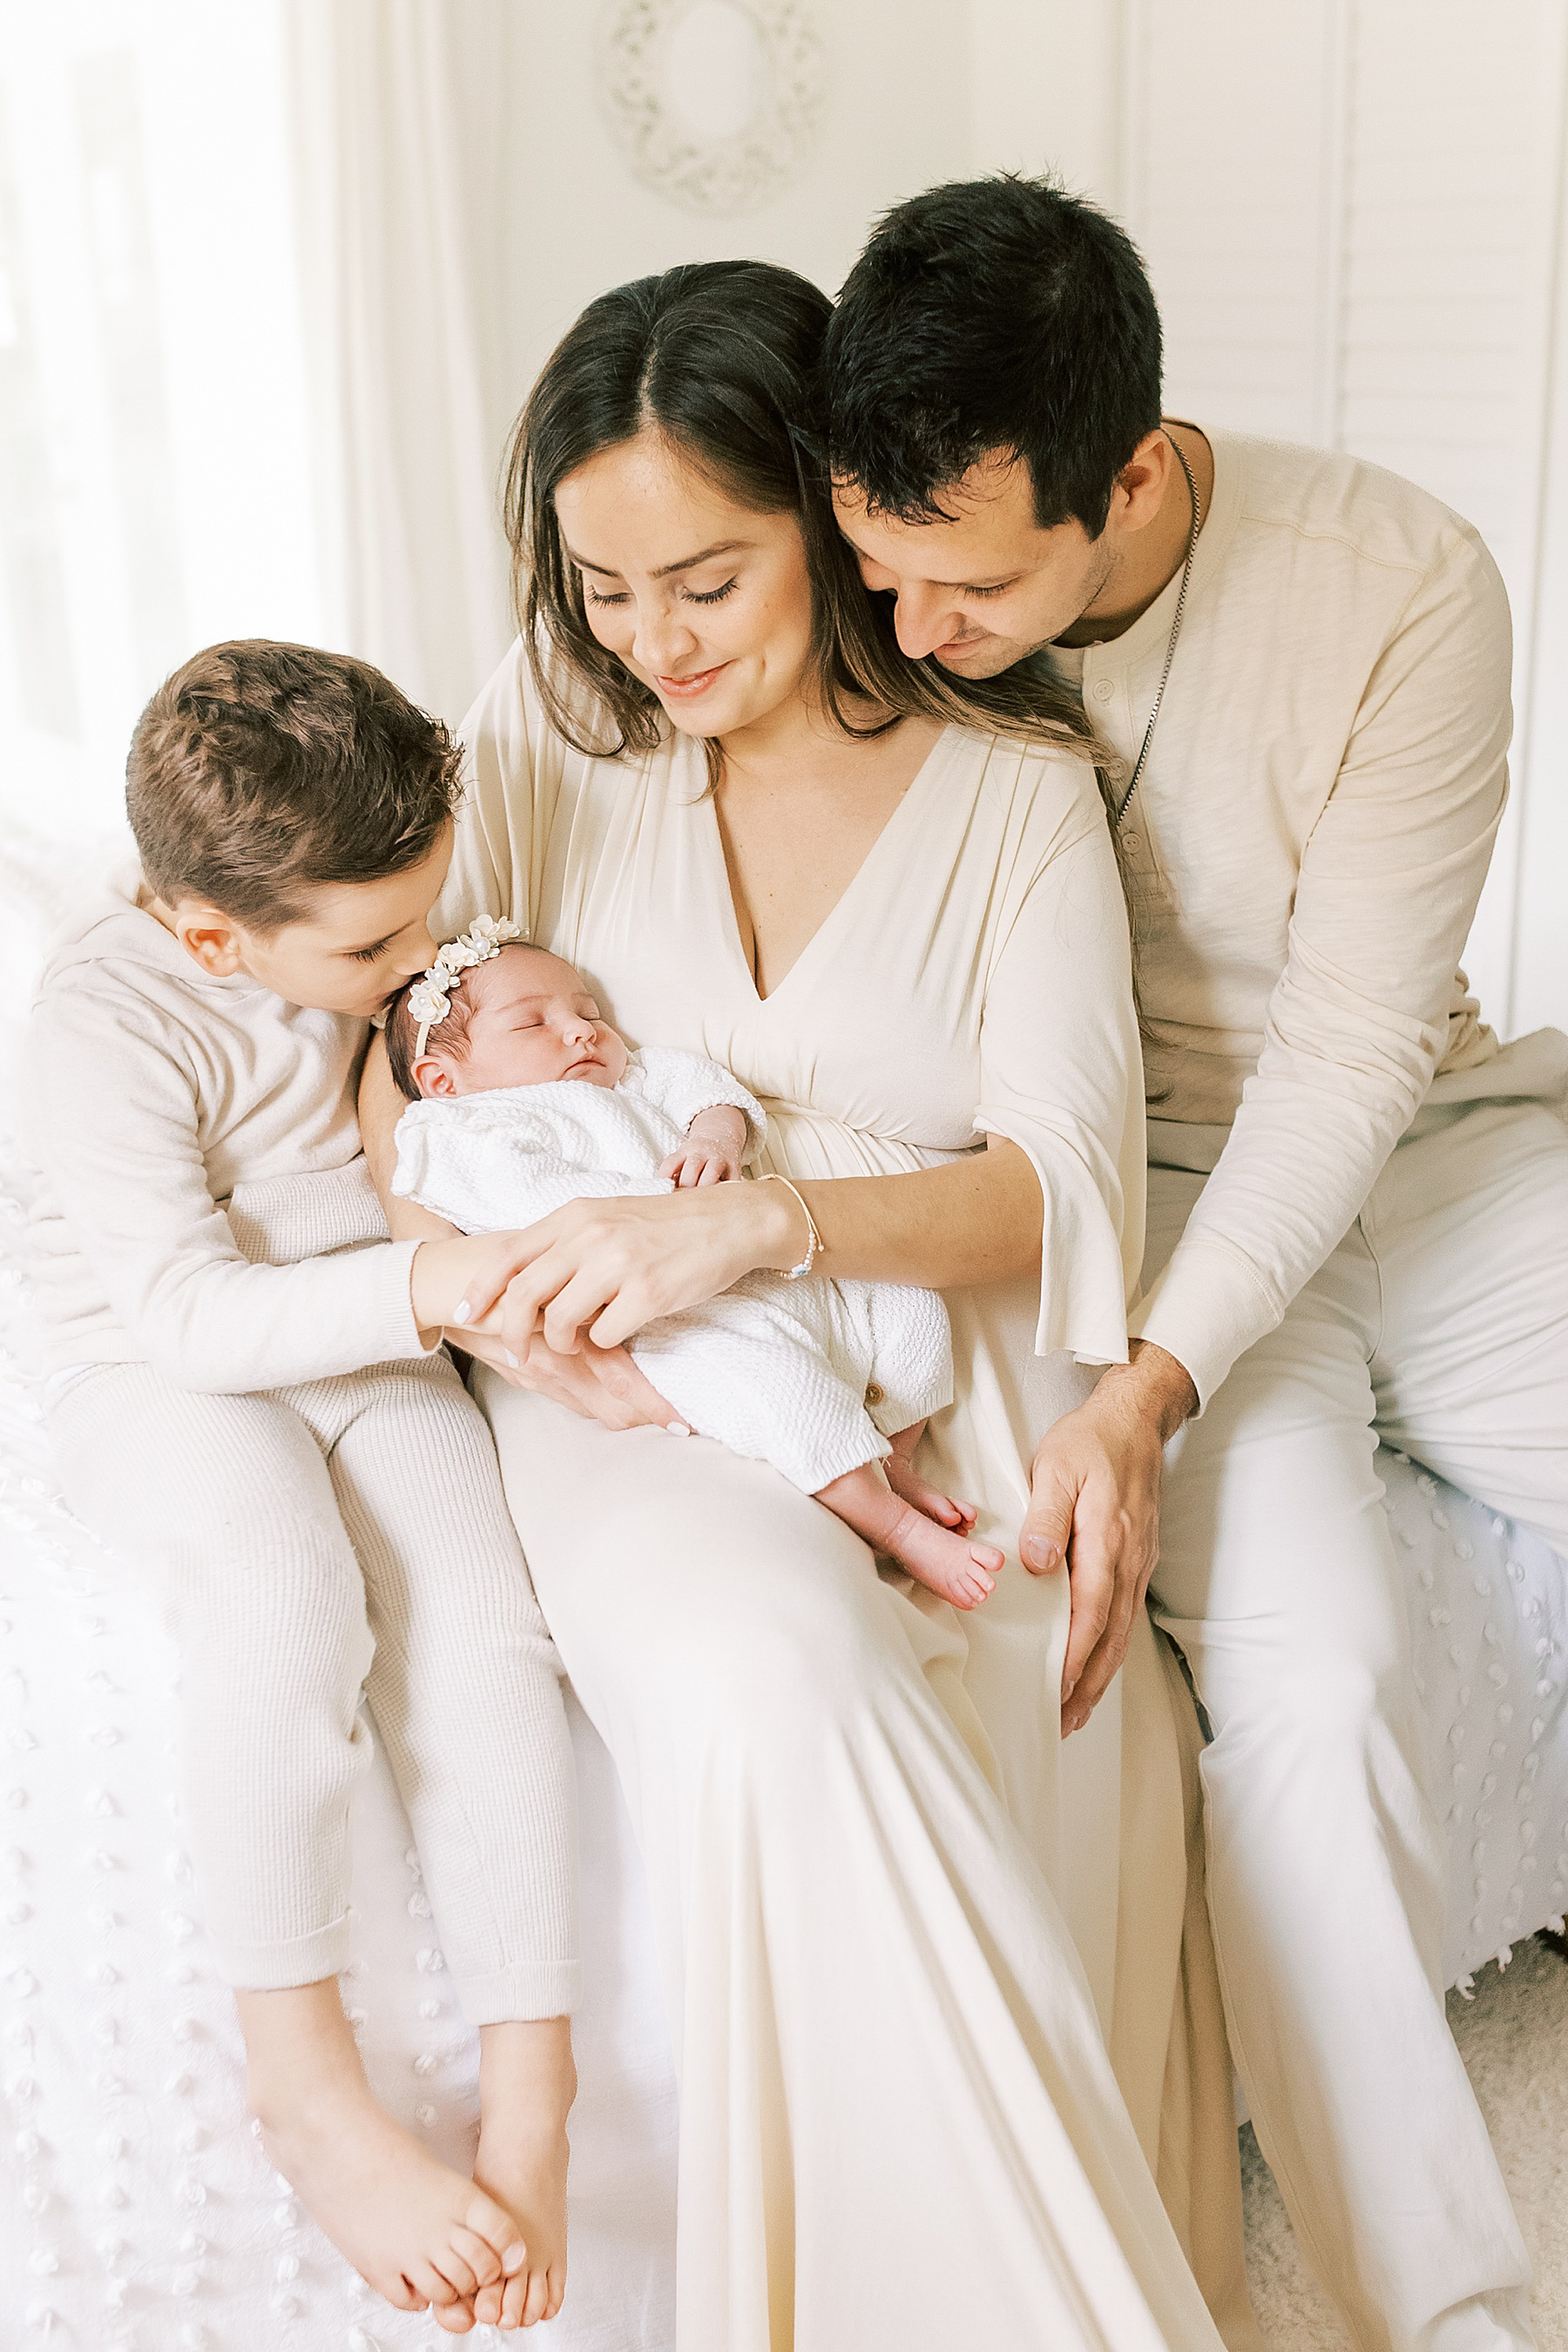 family wearing neutral colors sitting on white bed holding newborn baby girl